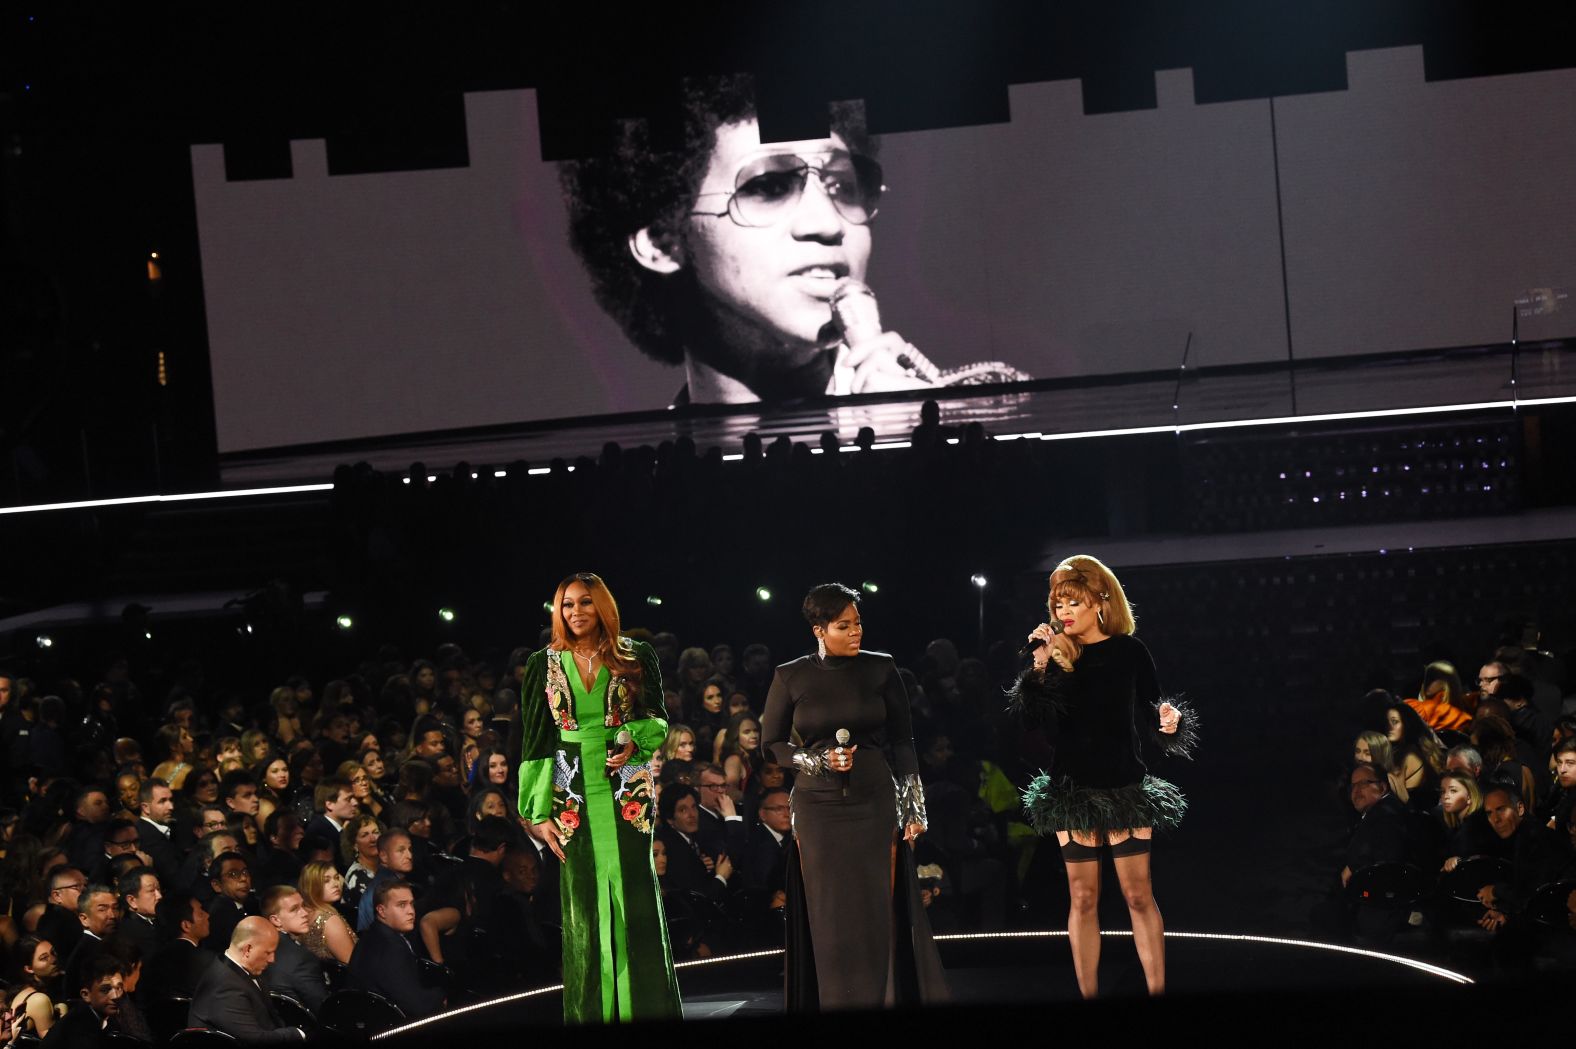 An image of the late Aretha Franklin is projected on a screen while Yolanda Adams, Fantasia and Andra Day perform a tribute.